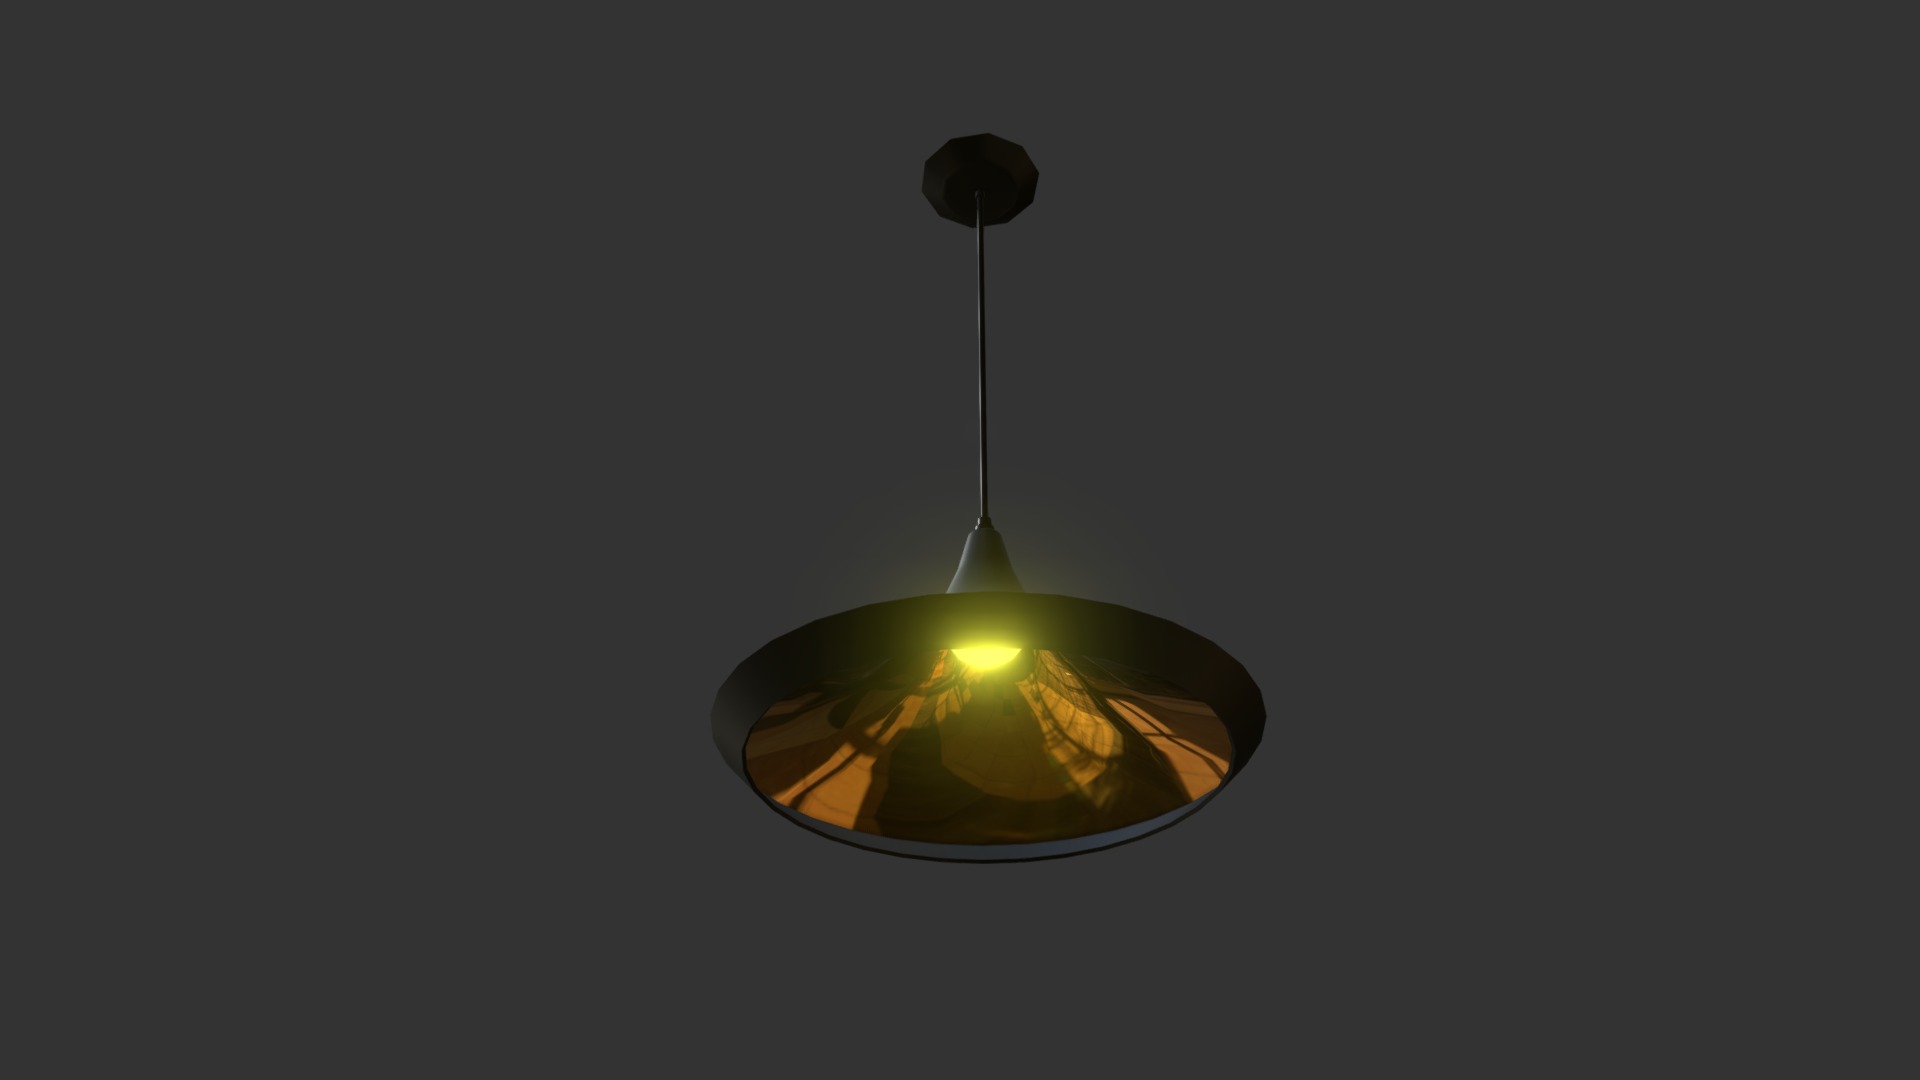 3D model HGPLD124 - This is a 3D model of the HGPLD124. The 3D model is about a light bulb with a flame.